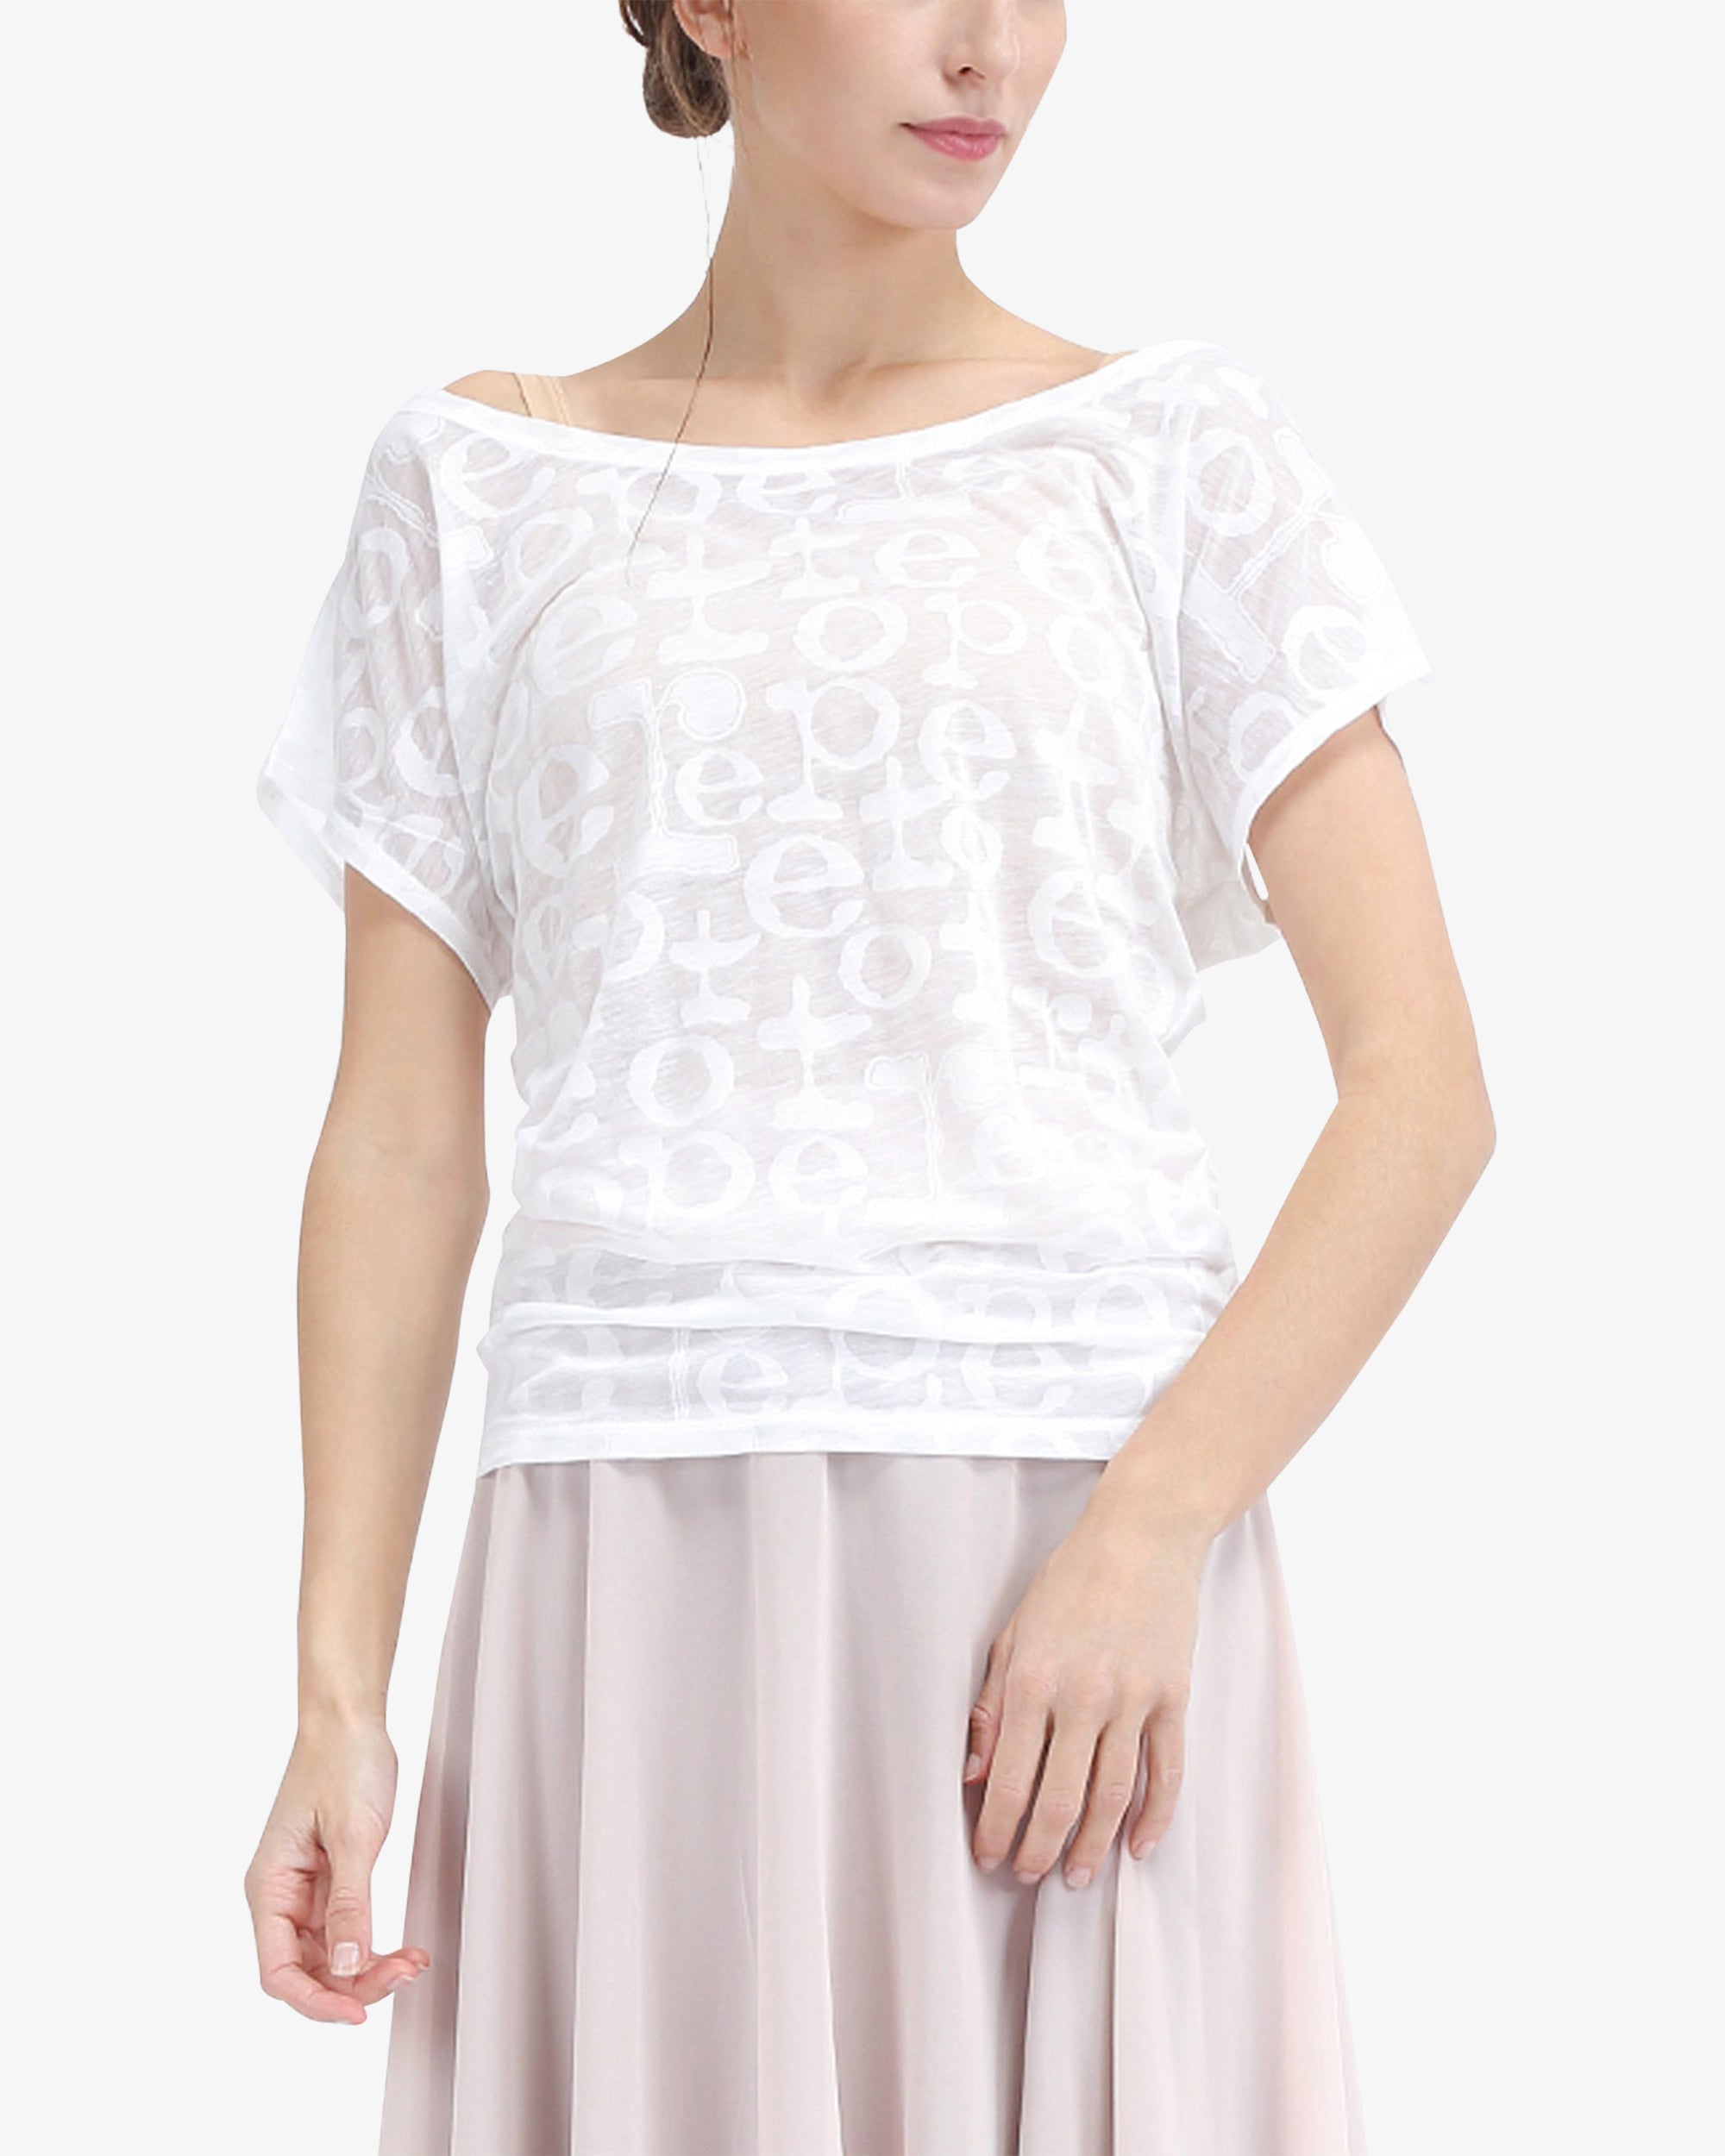 T-shirt transparence Repetto Blanc